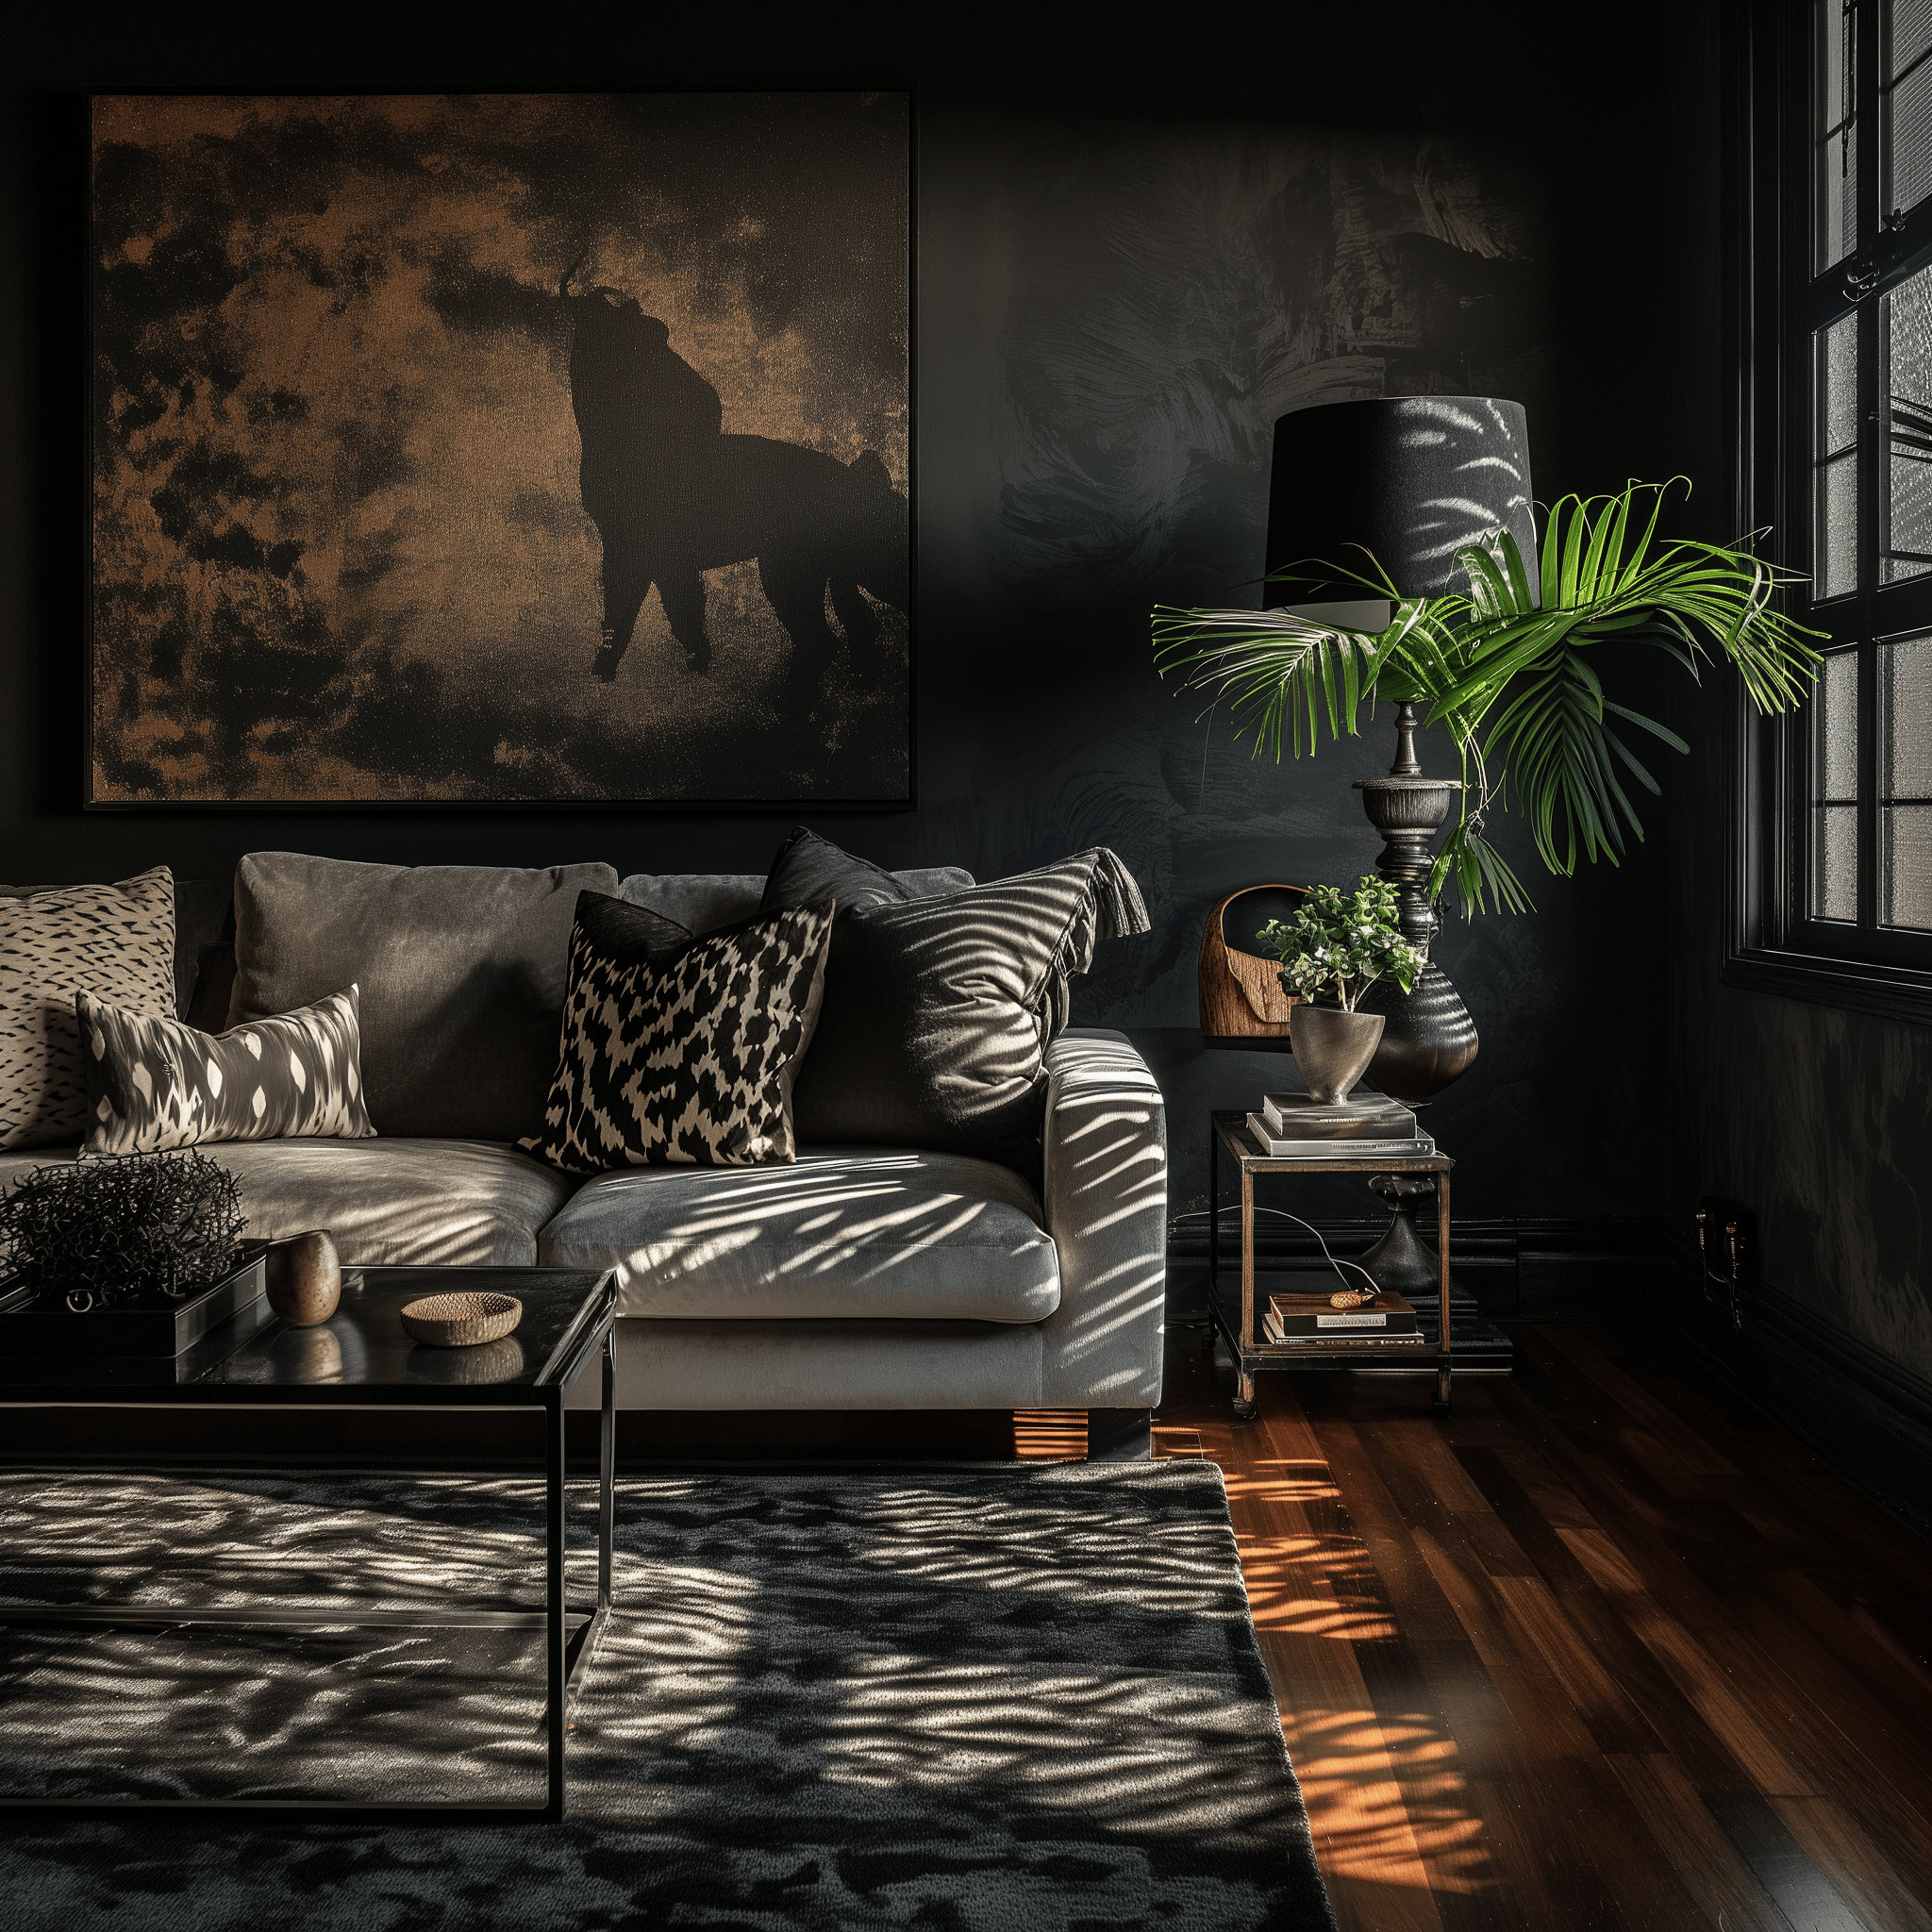 Elegant and cozy dark living room, captured at eye-level, featuring luxury textiles and unique wall textures in daylight.